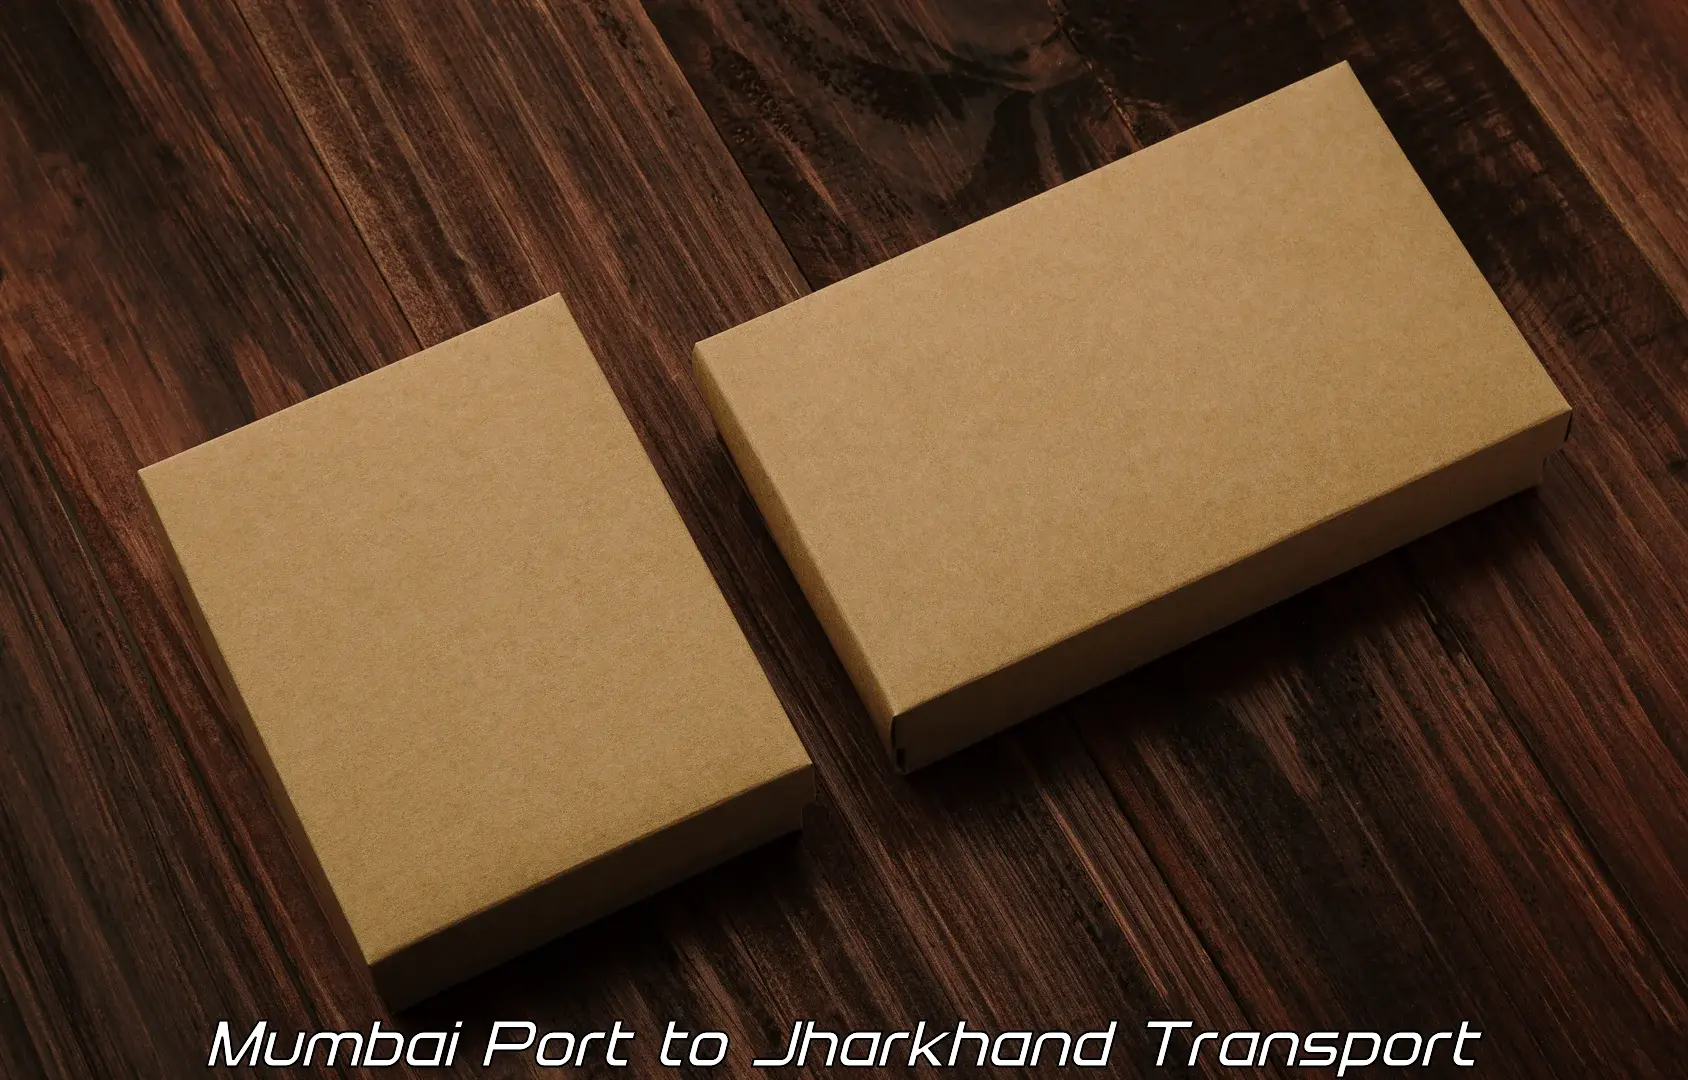 Delivery service Mumbai Port to Jharkhand